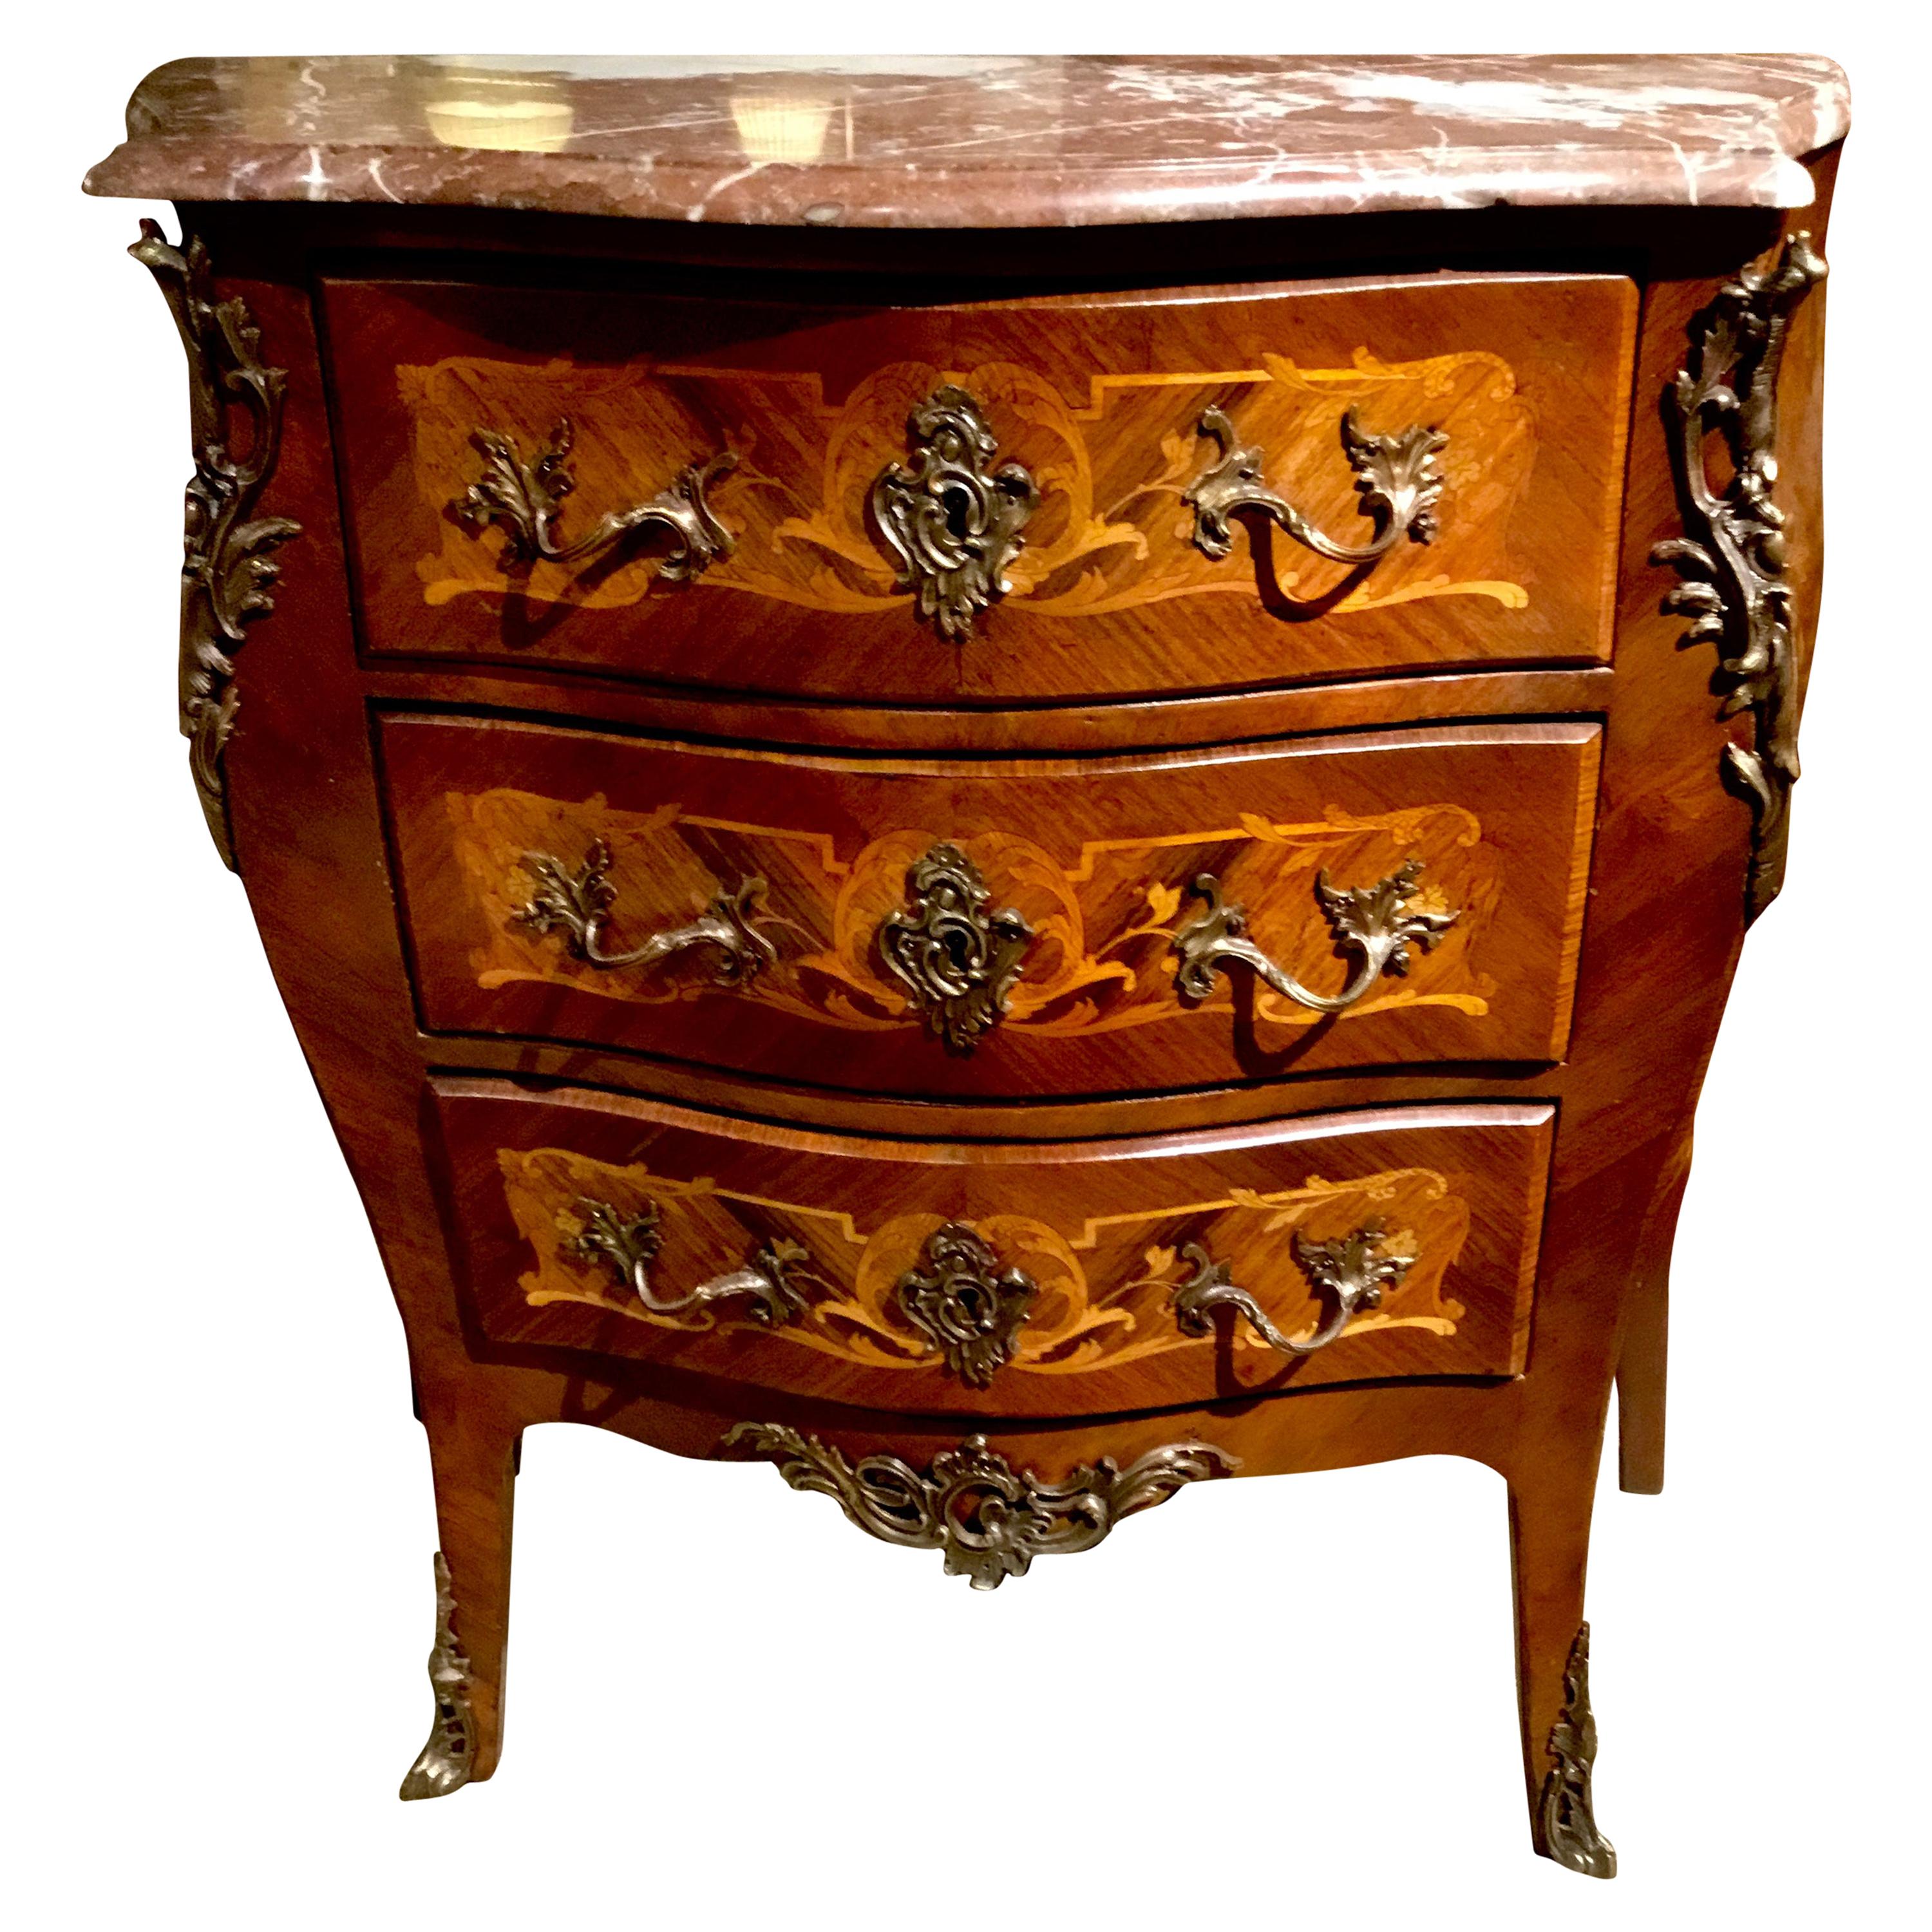 French Commode/ Chest Bombe’ Form with Marquetry Inlay and Bronze Mounts 19th C